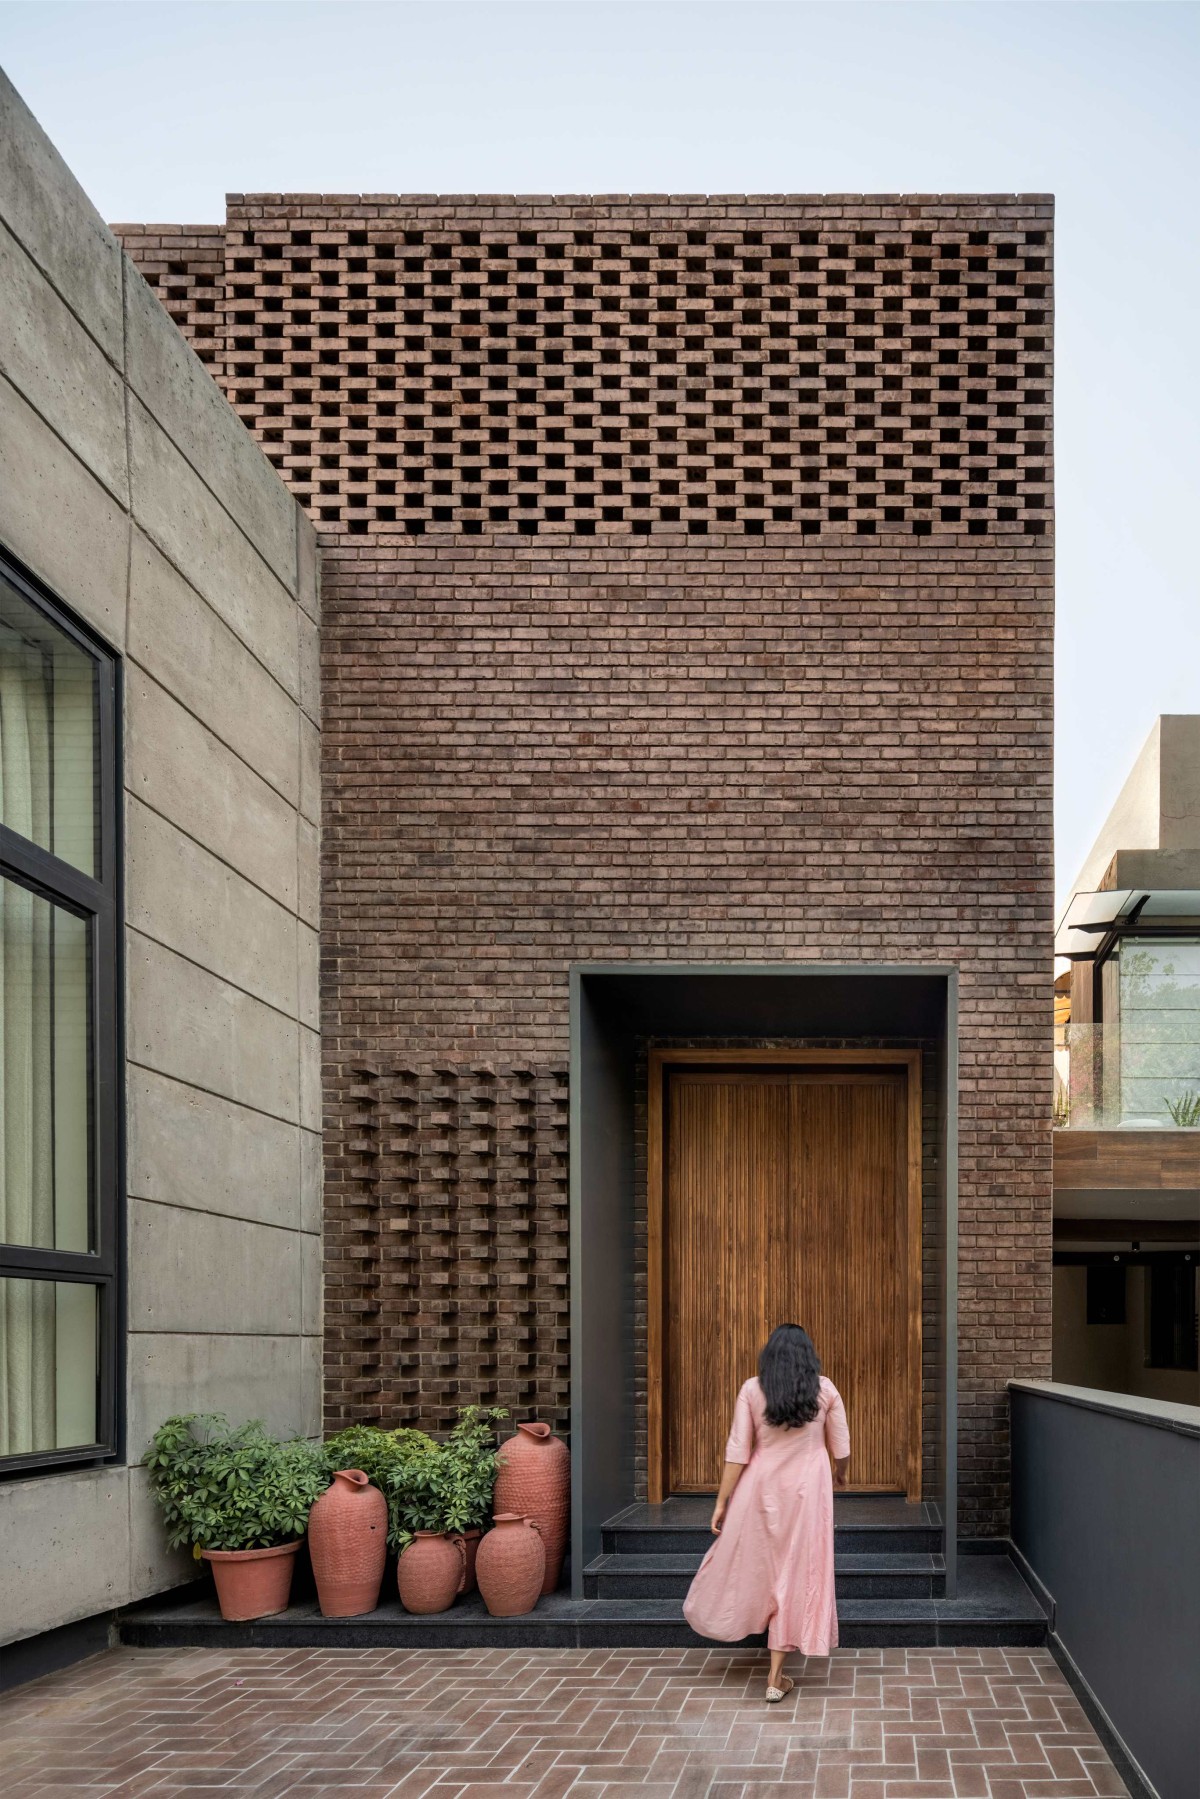 Entrance of The Brick House by Studio Ardete